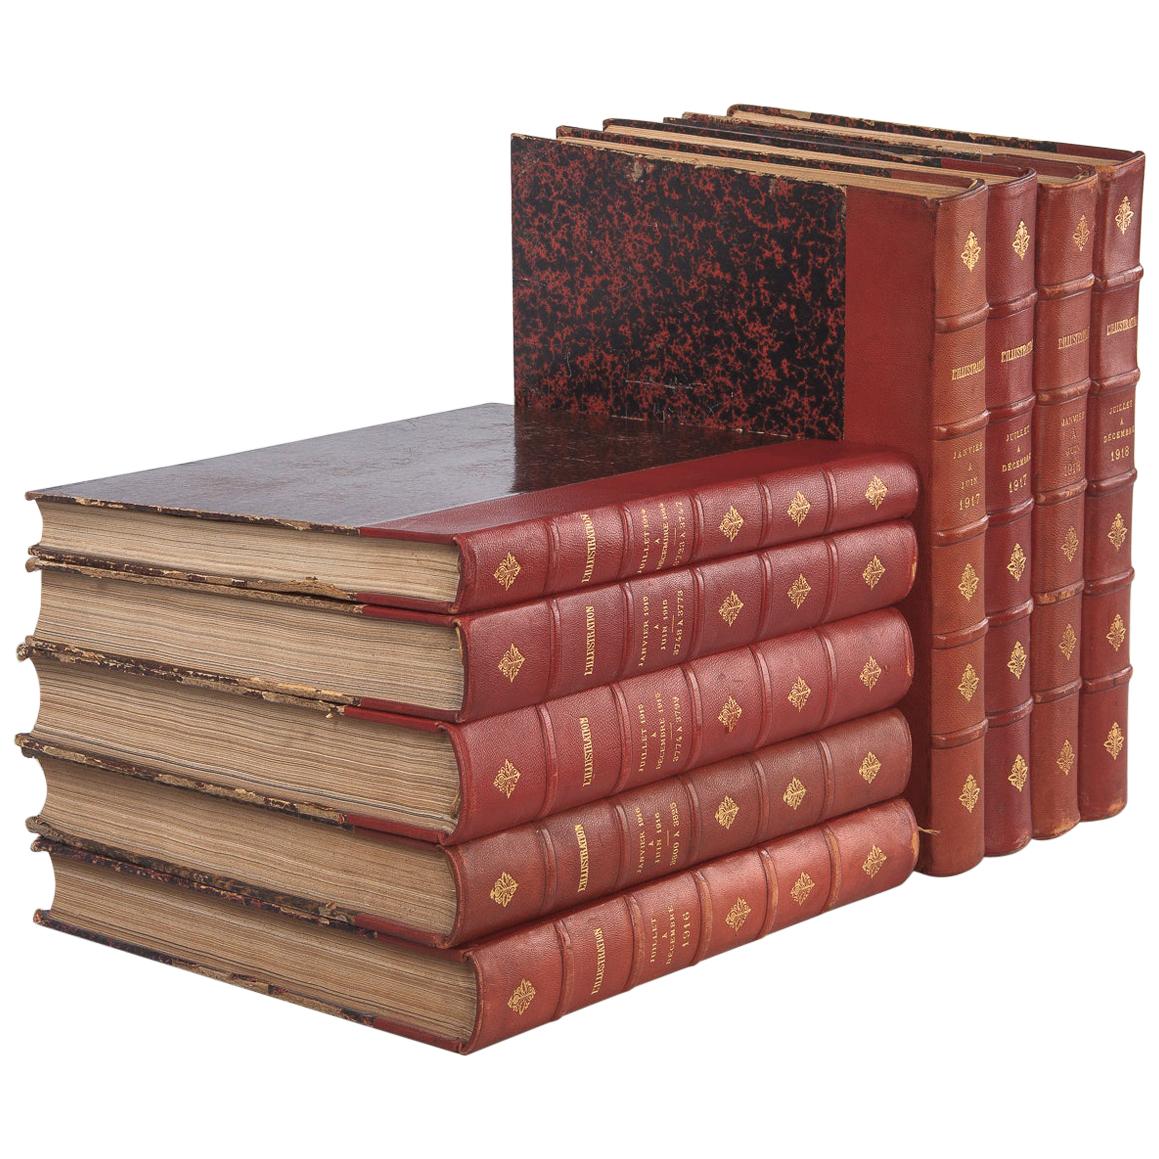 World War One Illustrated French Leather Bound Books, 1914-1918